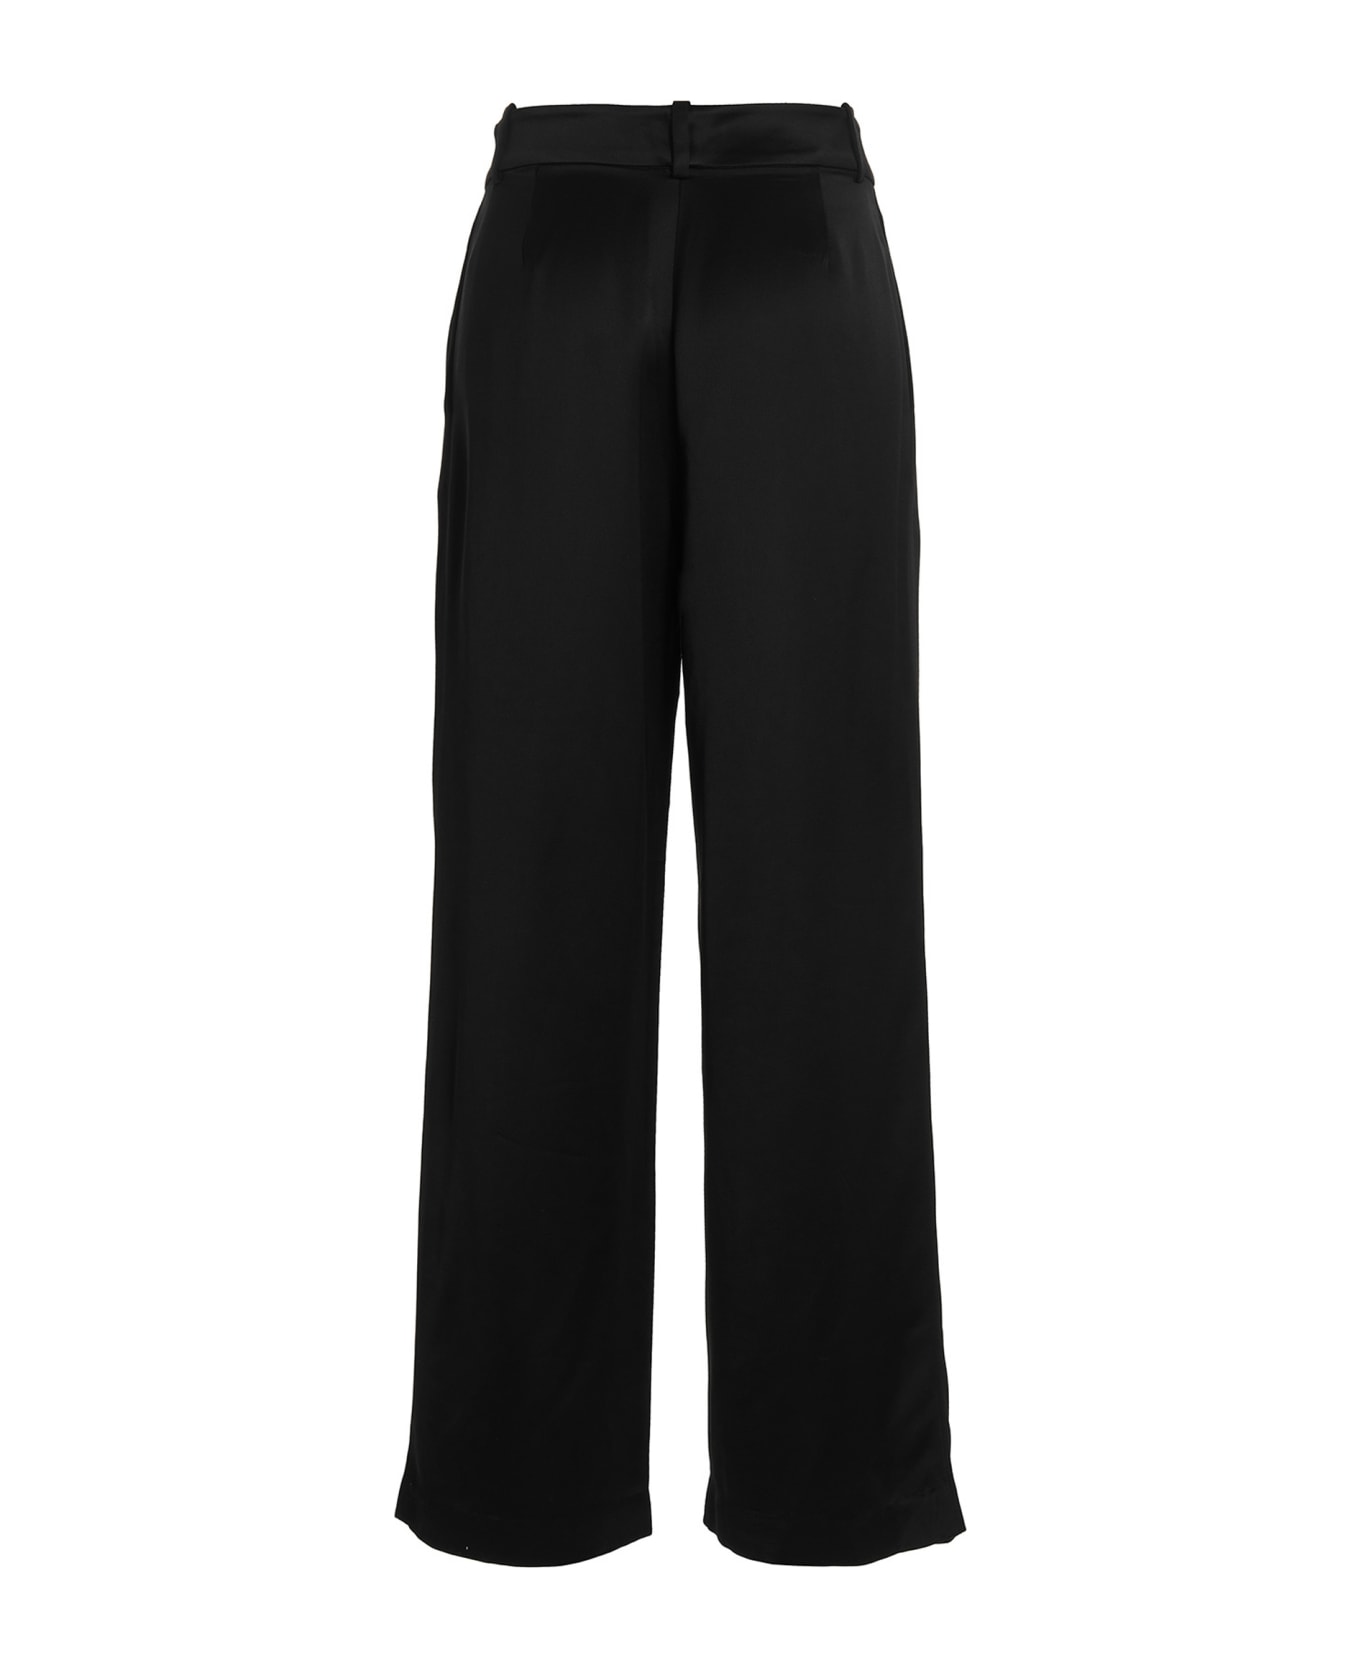 Co Pants With Front Pleats - Black   ボトムス